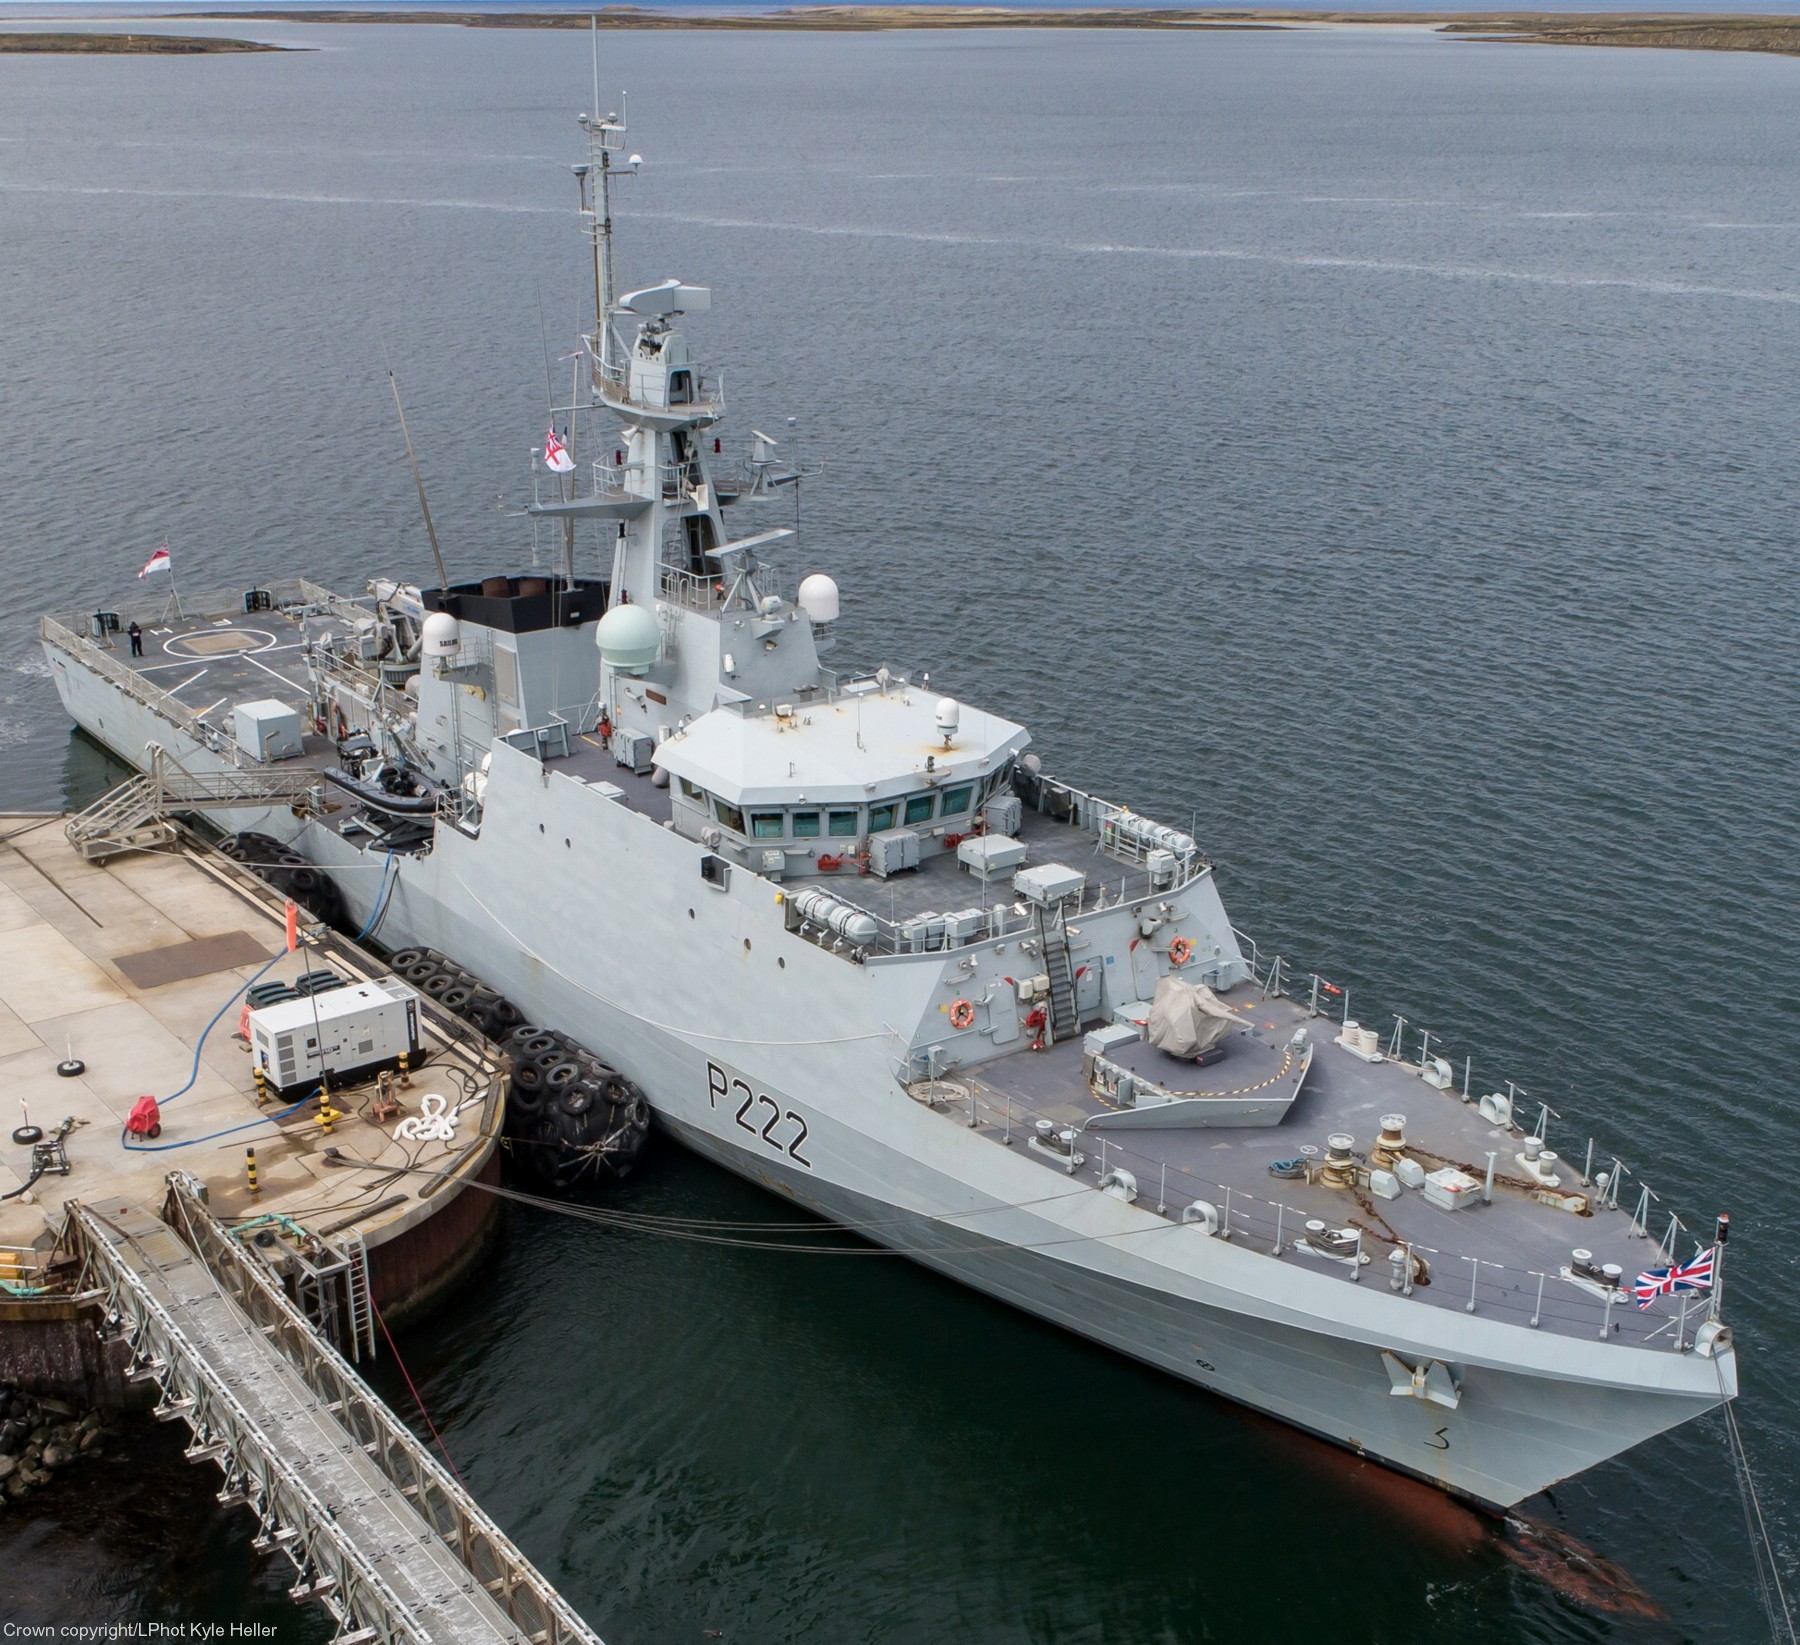 p222 hms forth river class offshore patrol vessel opv royal navy 16